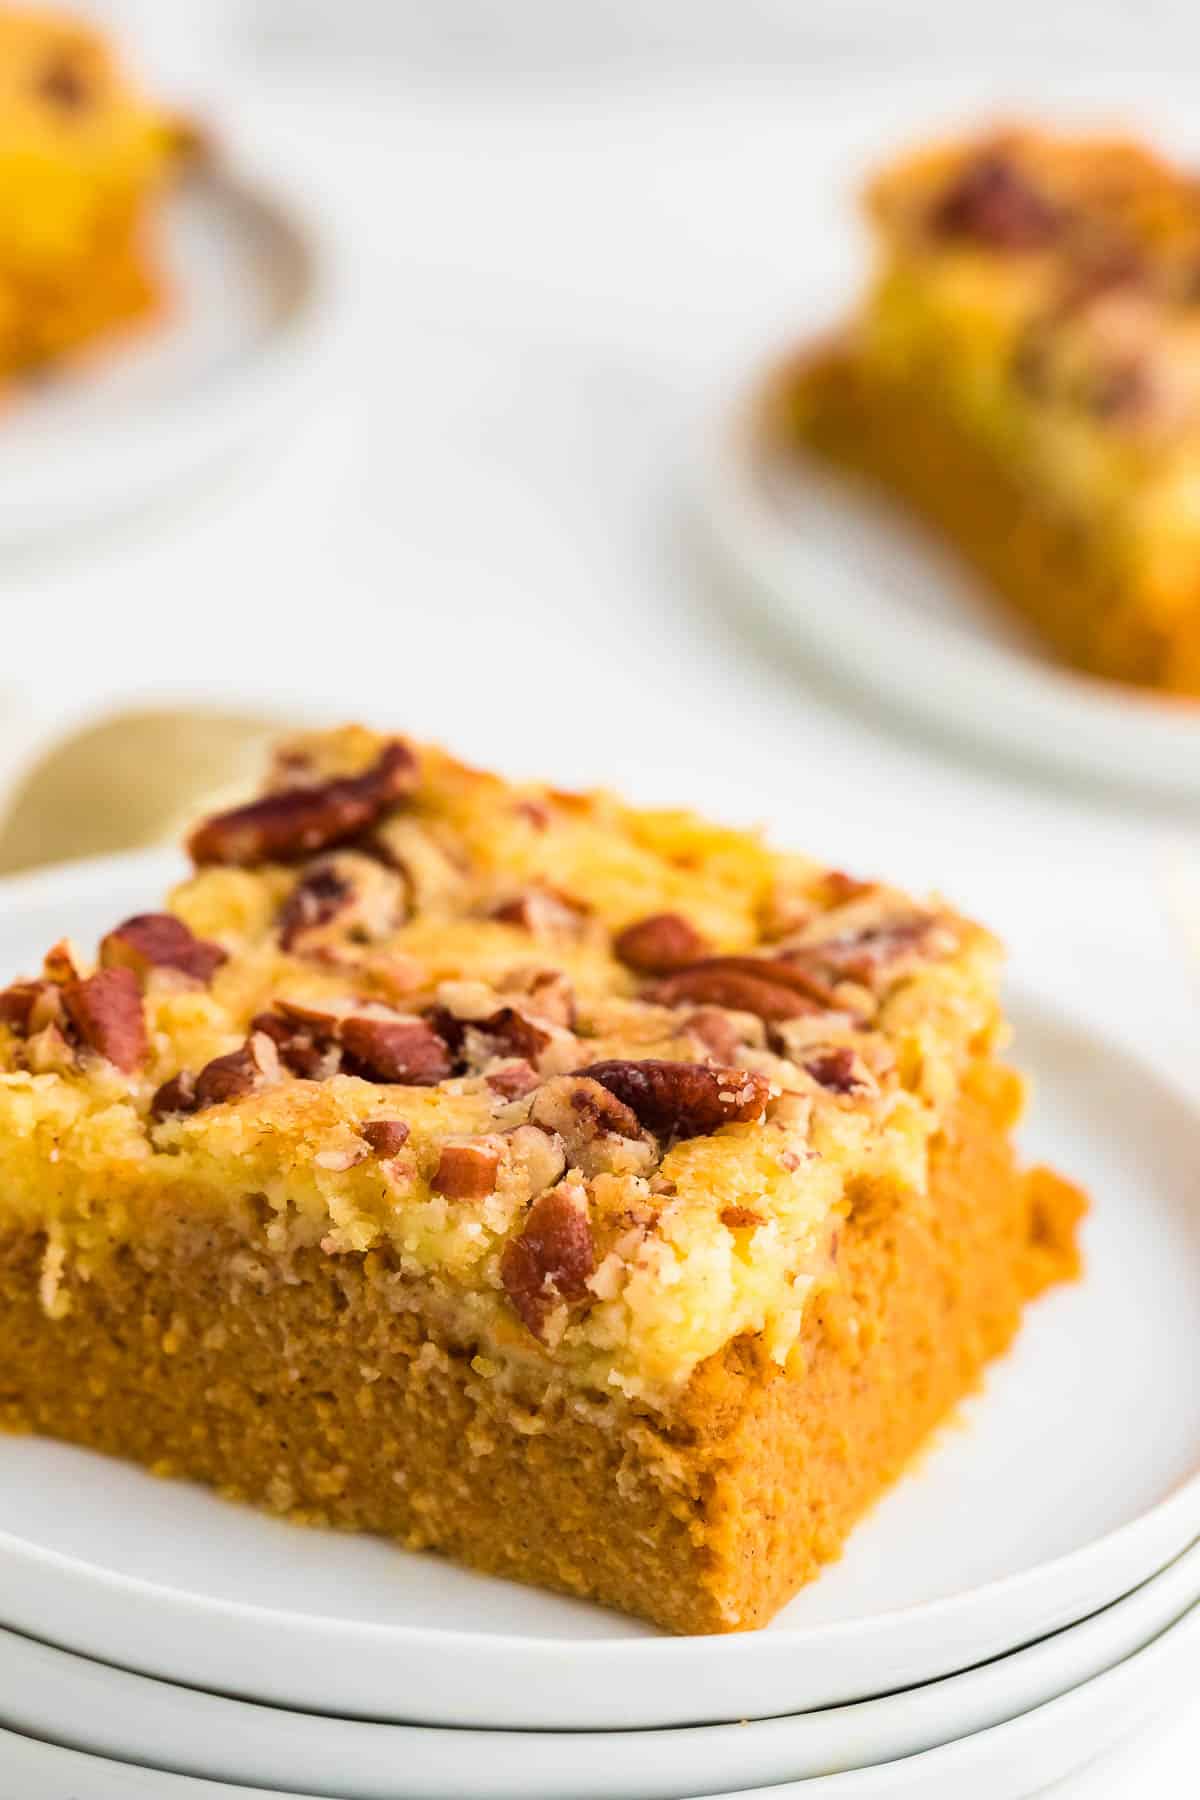 A slice of Pumpkin Dump Cake topped with pecans.